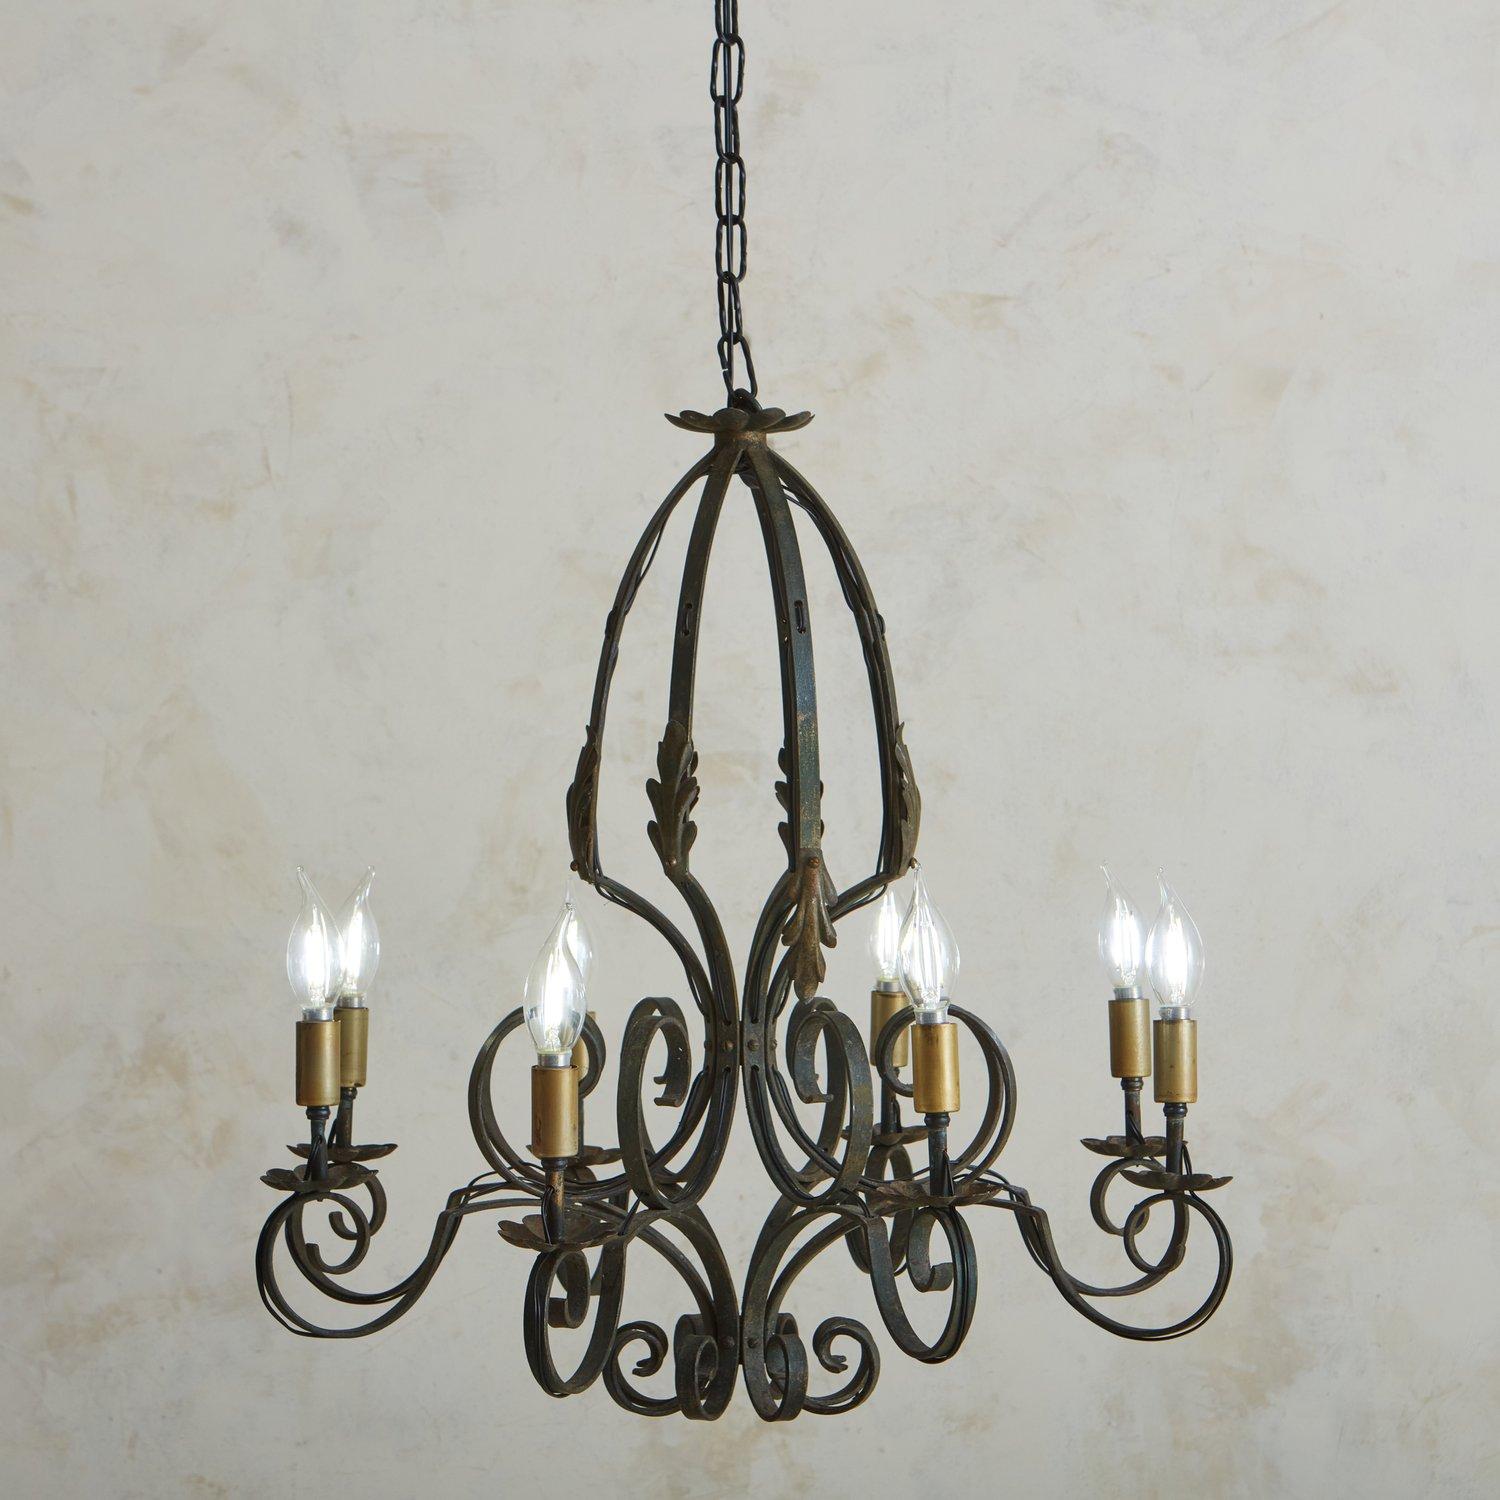 Rustic Wrought Iron Iron Chandelier, France, 1920s For Sale